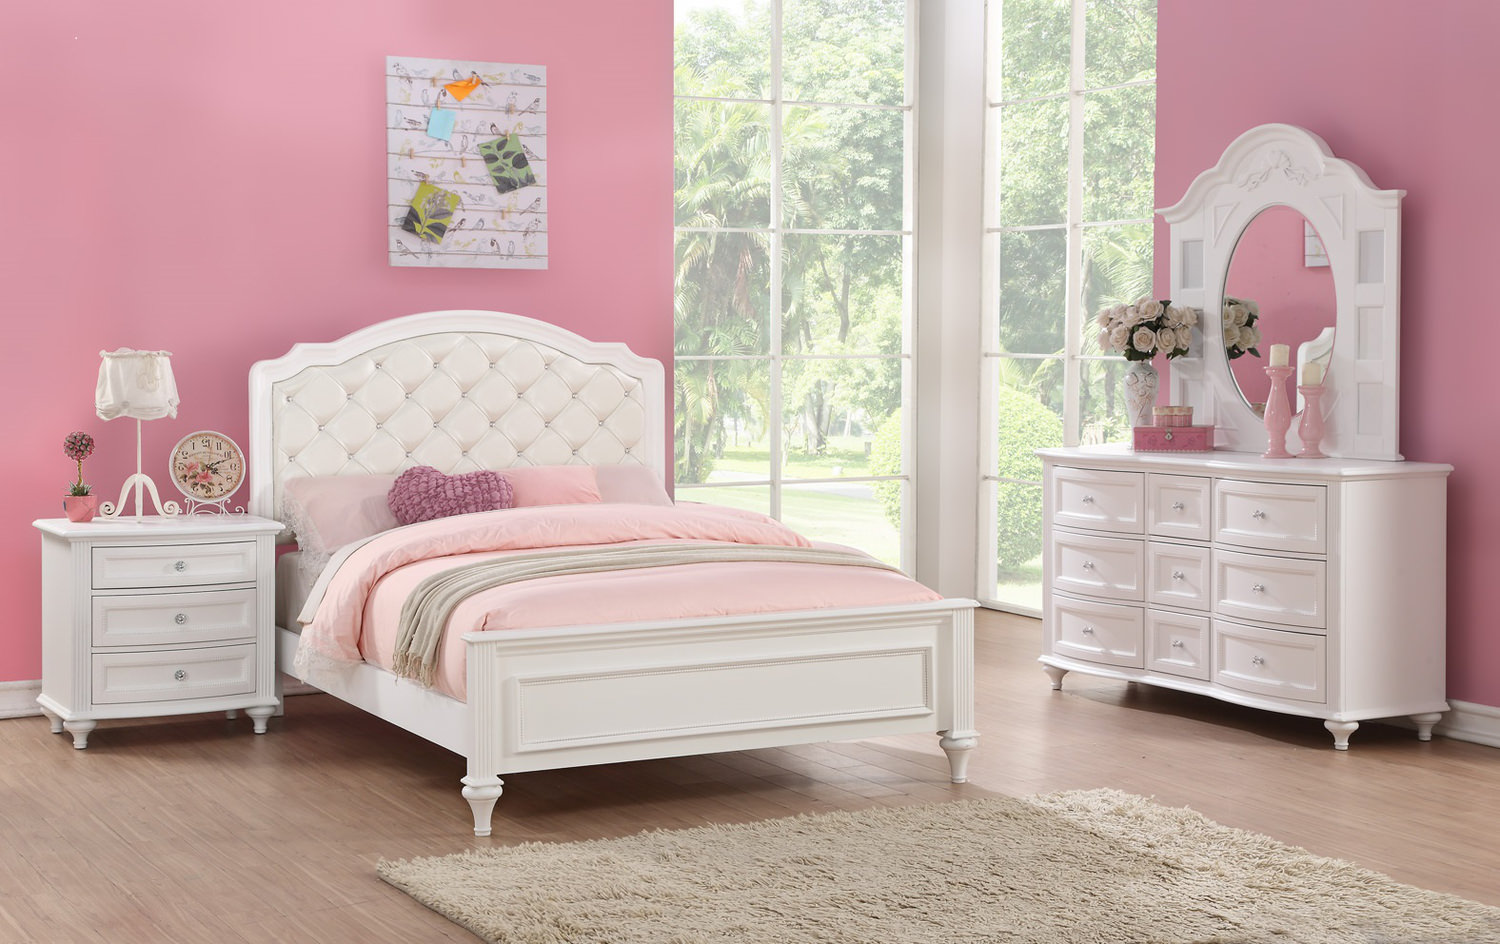 Chantilly Upholstered Bedroom Suite - White | HOM Furniture